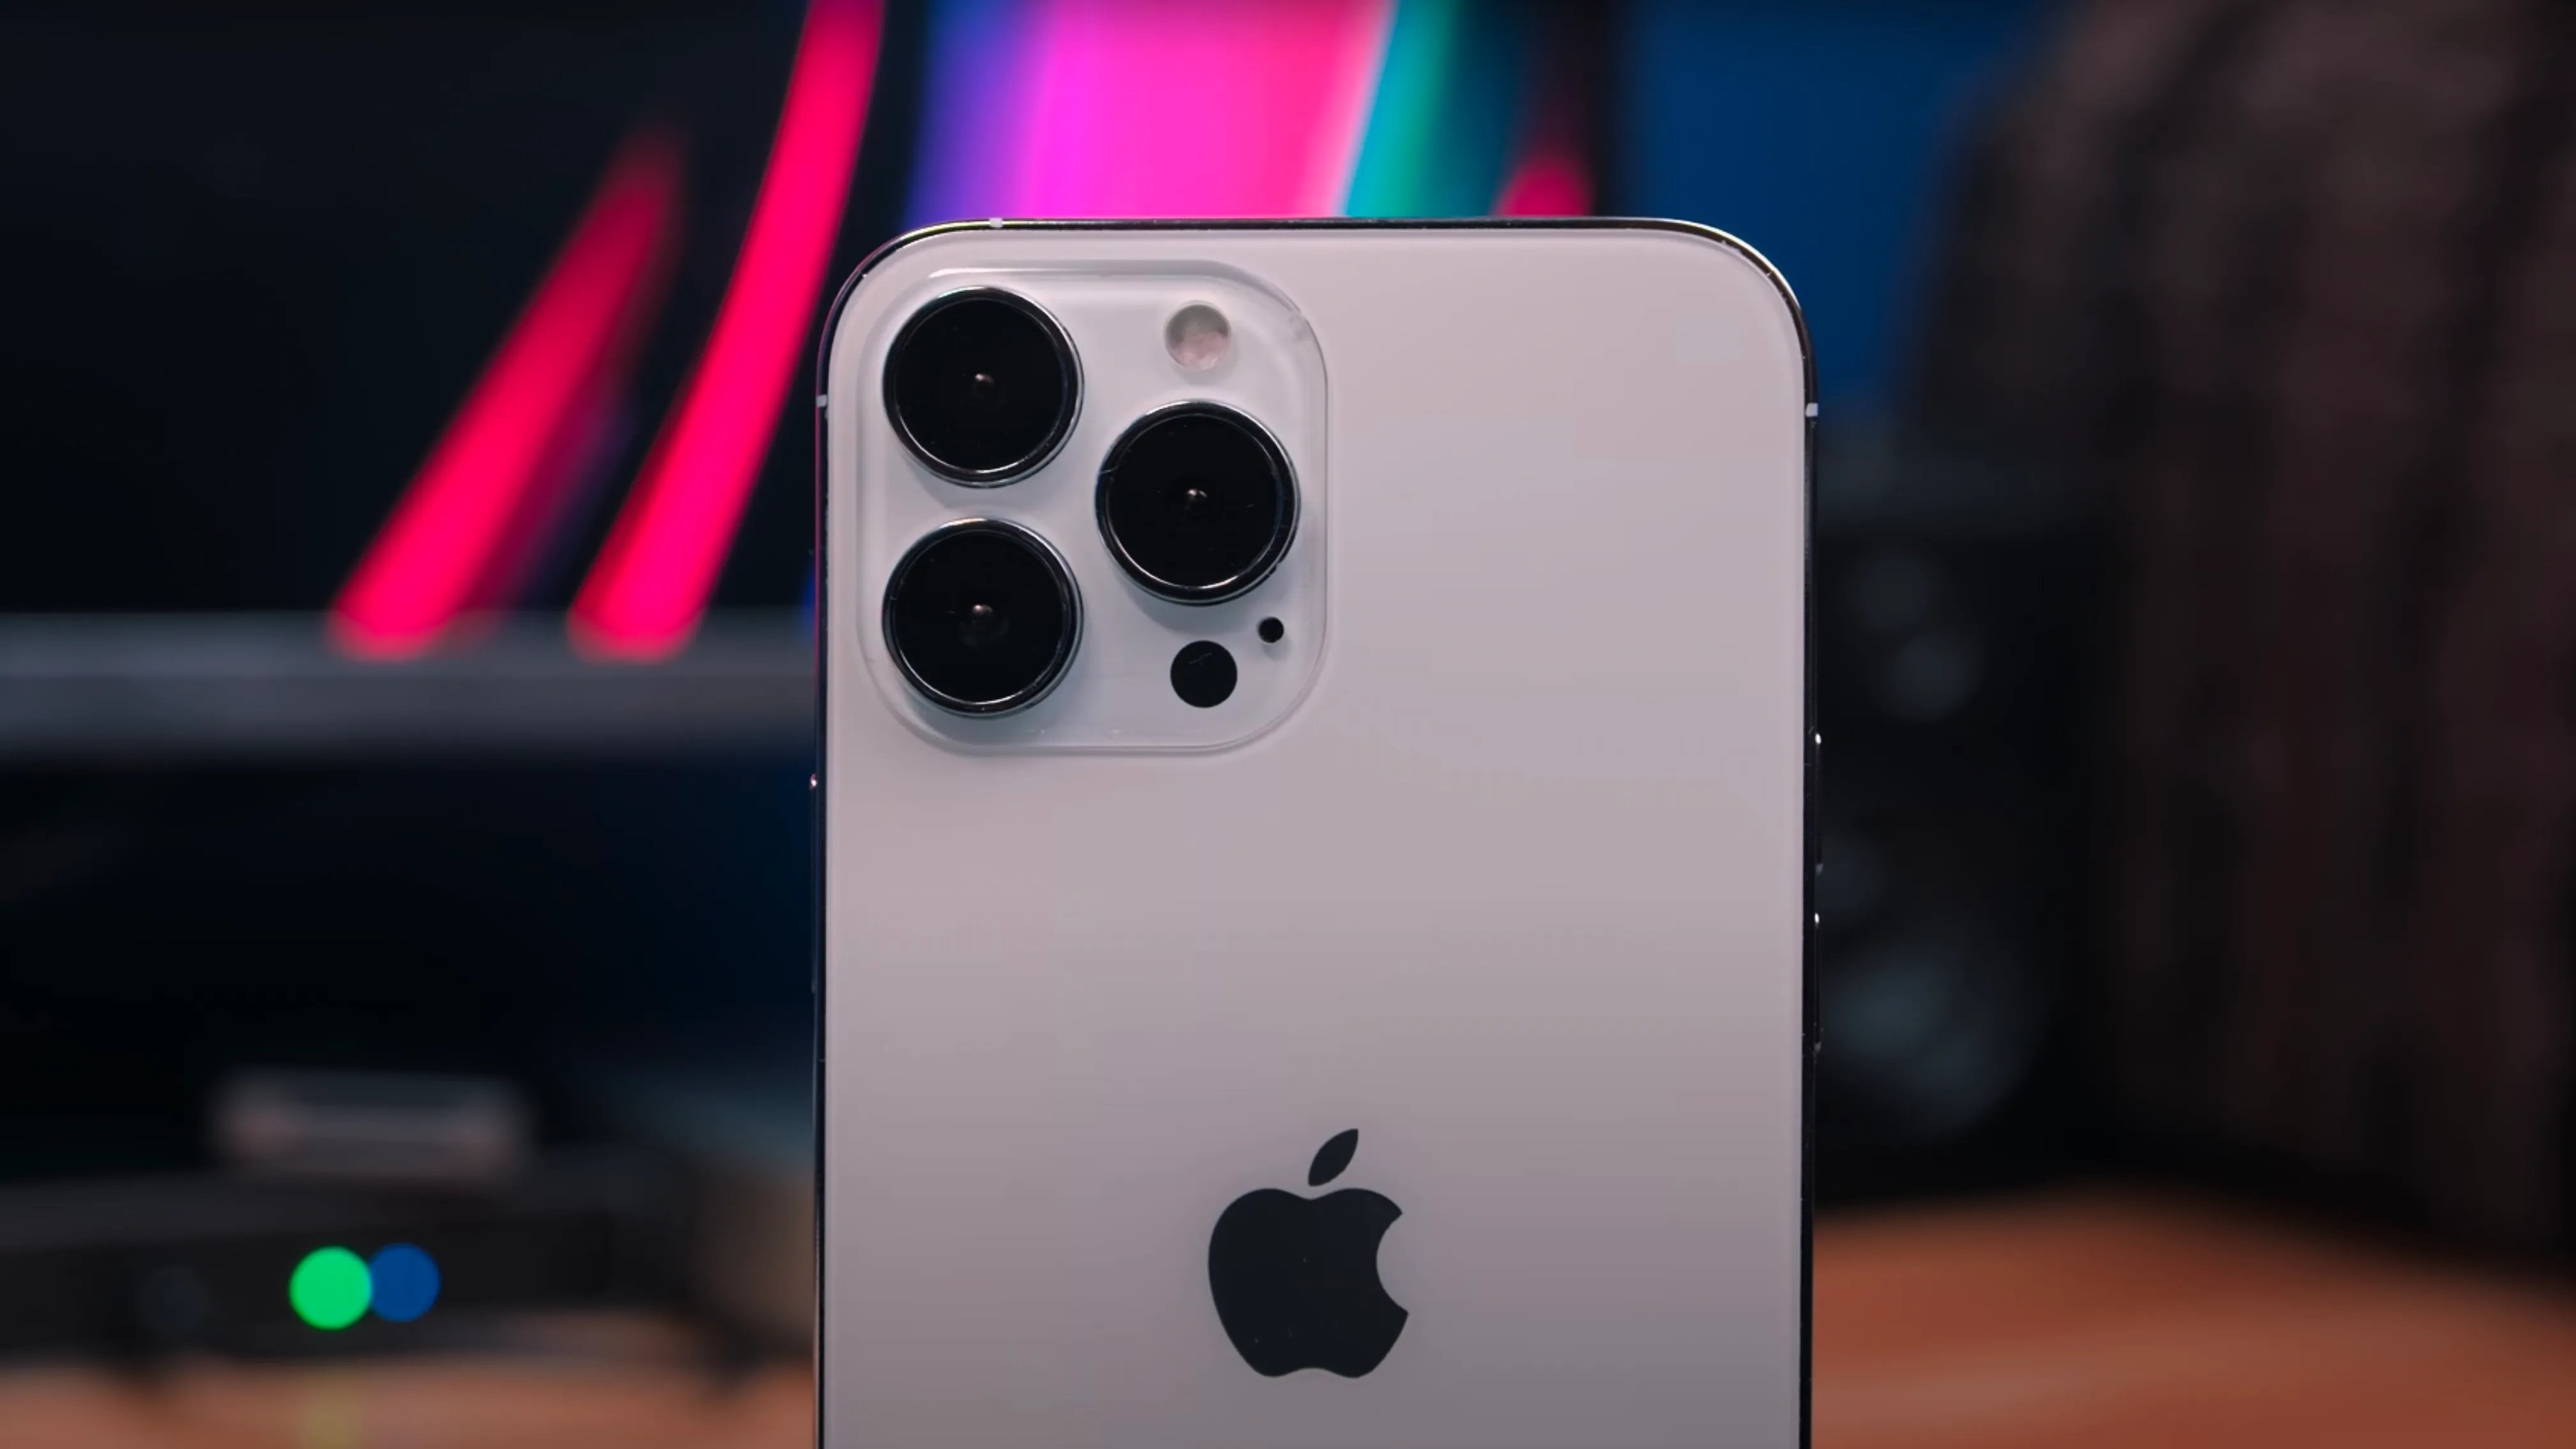 iphone-13-series-to-feature-upgraded-ultra-wide-camera-with-f-1-8-6p-lens-report